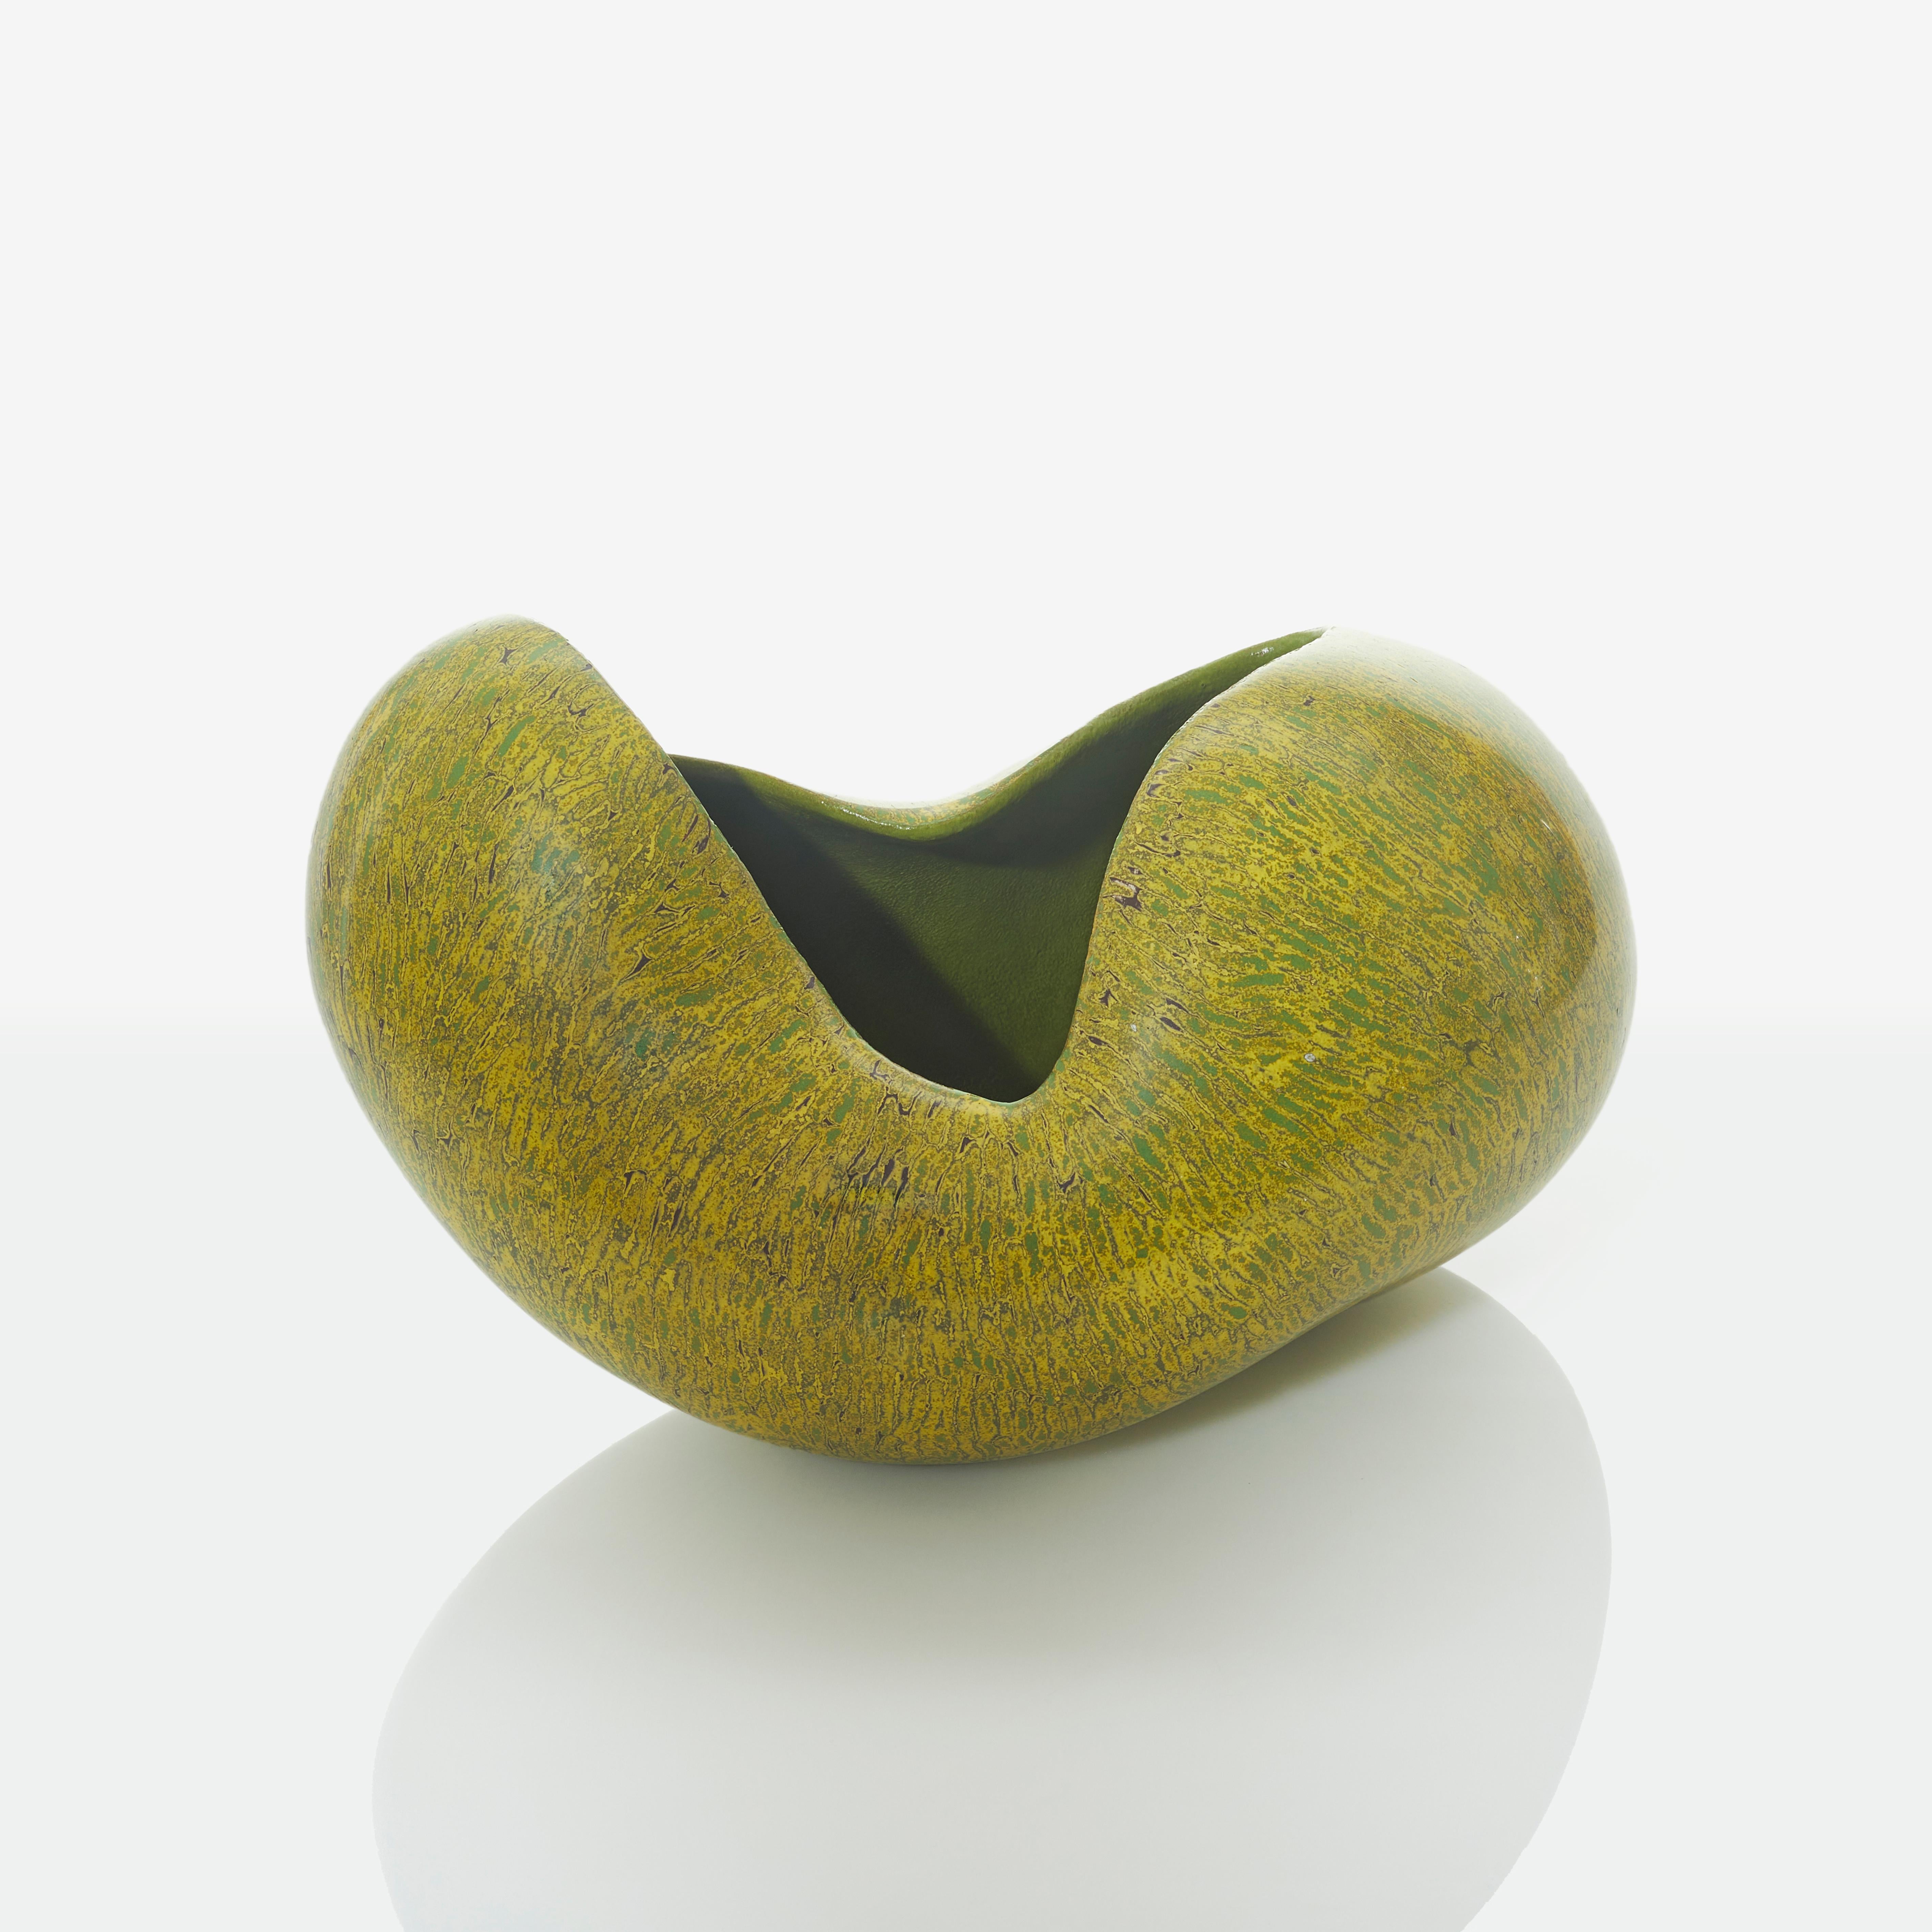 Sprout, 2023 (Ceramic, C. 11 in. h x 18.5 in. w x 12.2 in. d, Object No.: 4171)

Sangwoo Kim was born in Korea in 1980 and currently lives and works in France. He received his degree from the National University in Seoul and is the recipient of